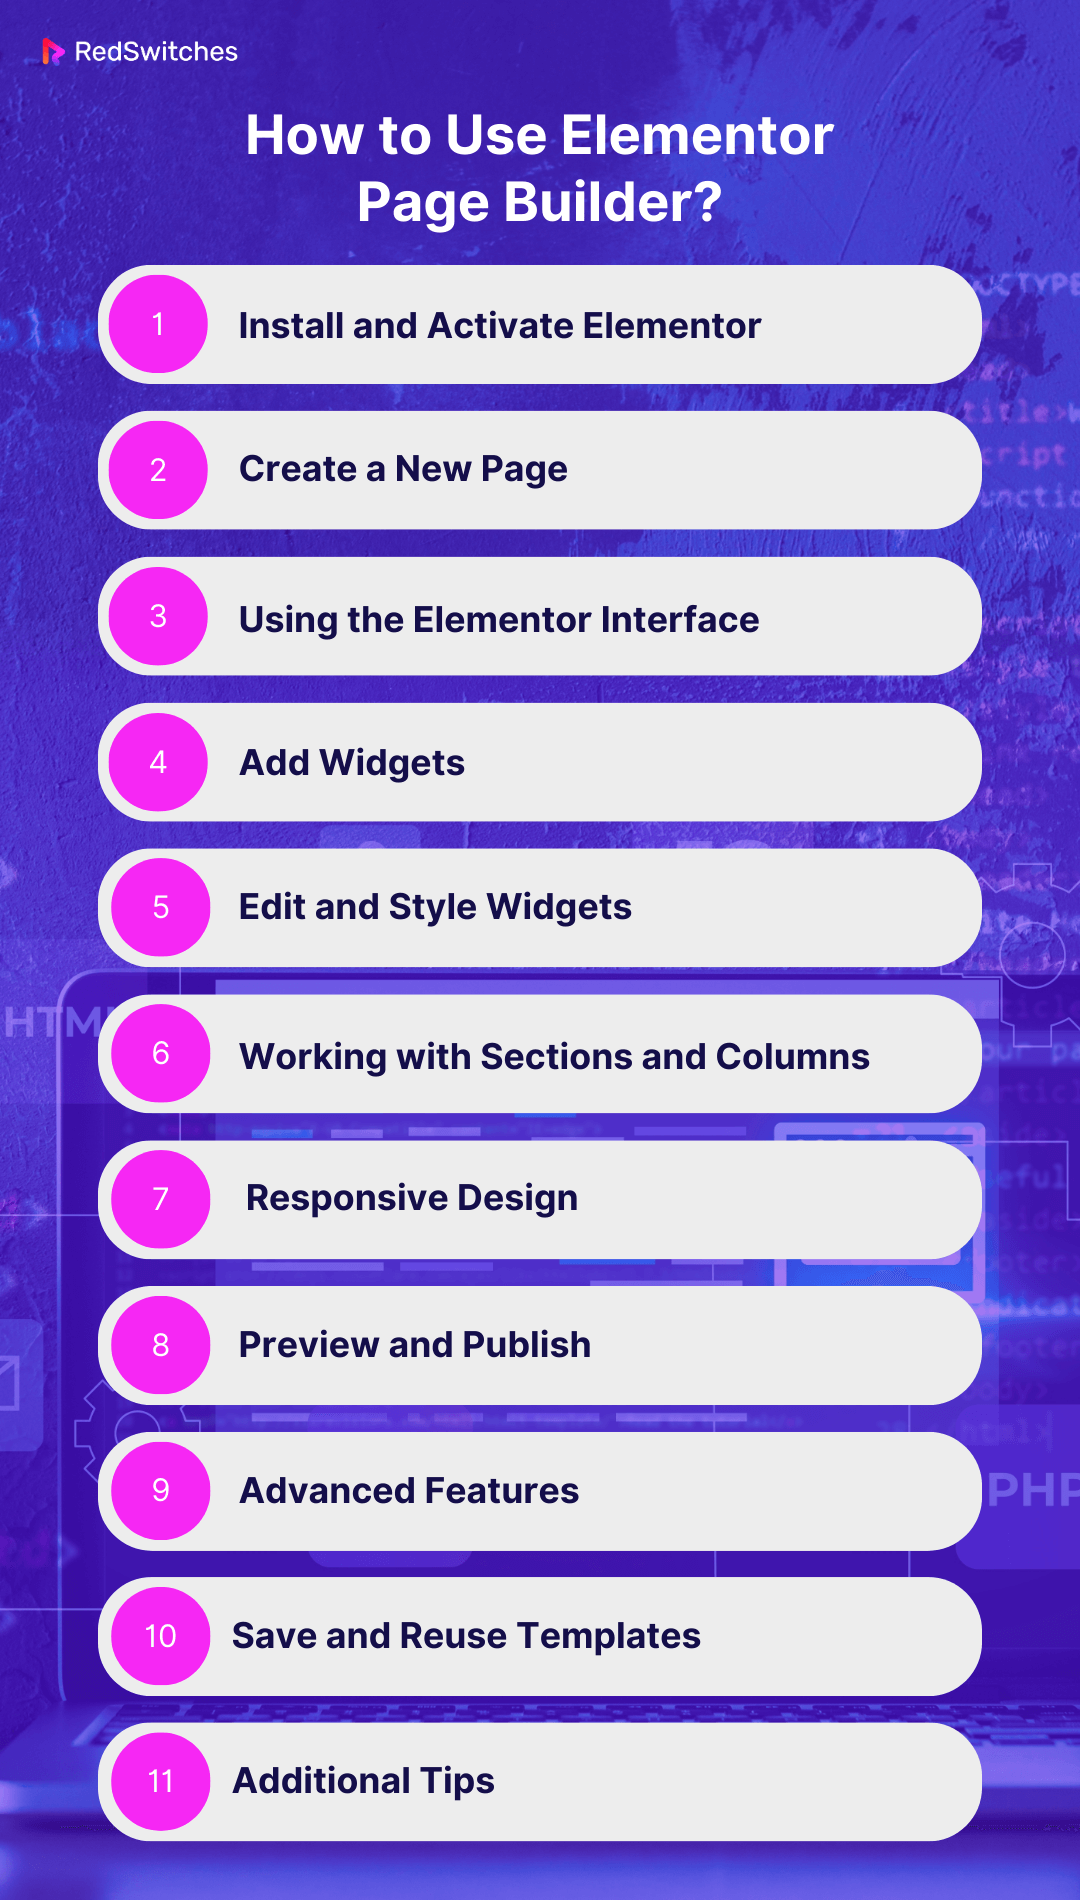 How to Use Elementor Page Builder